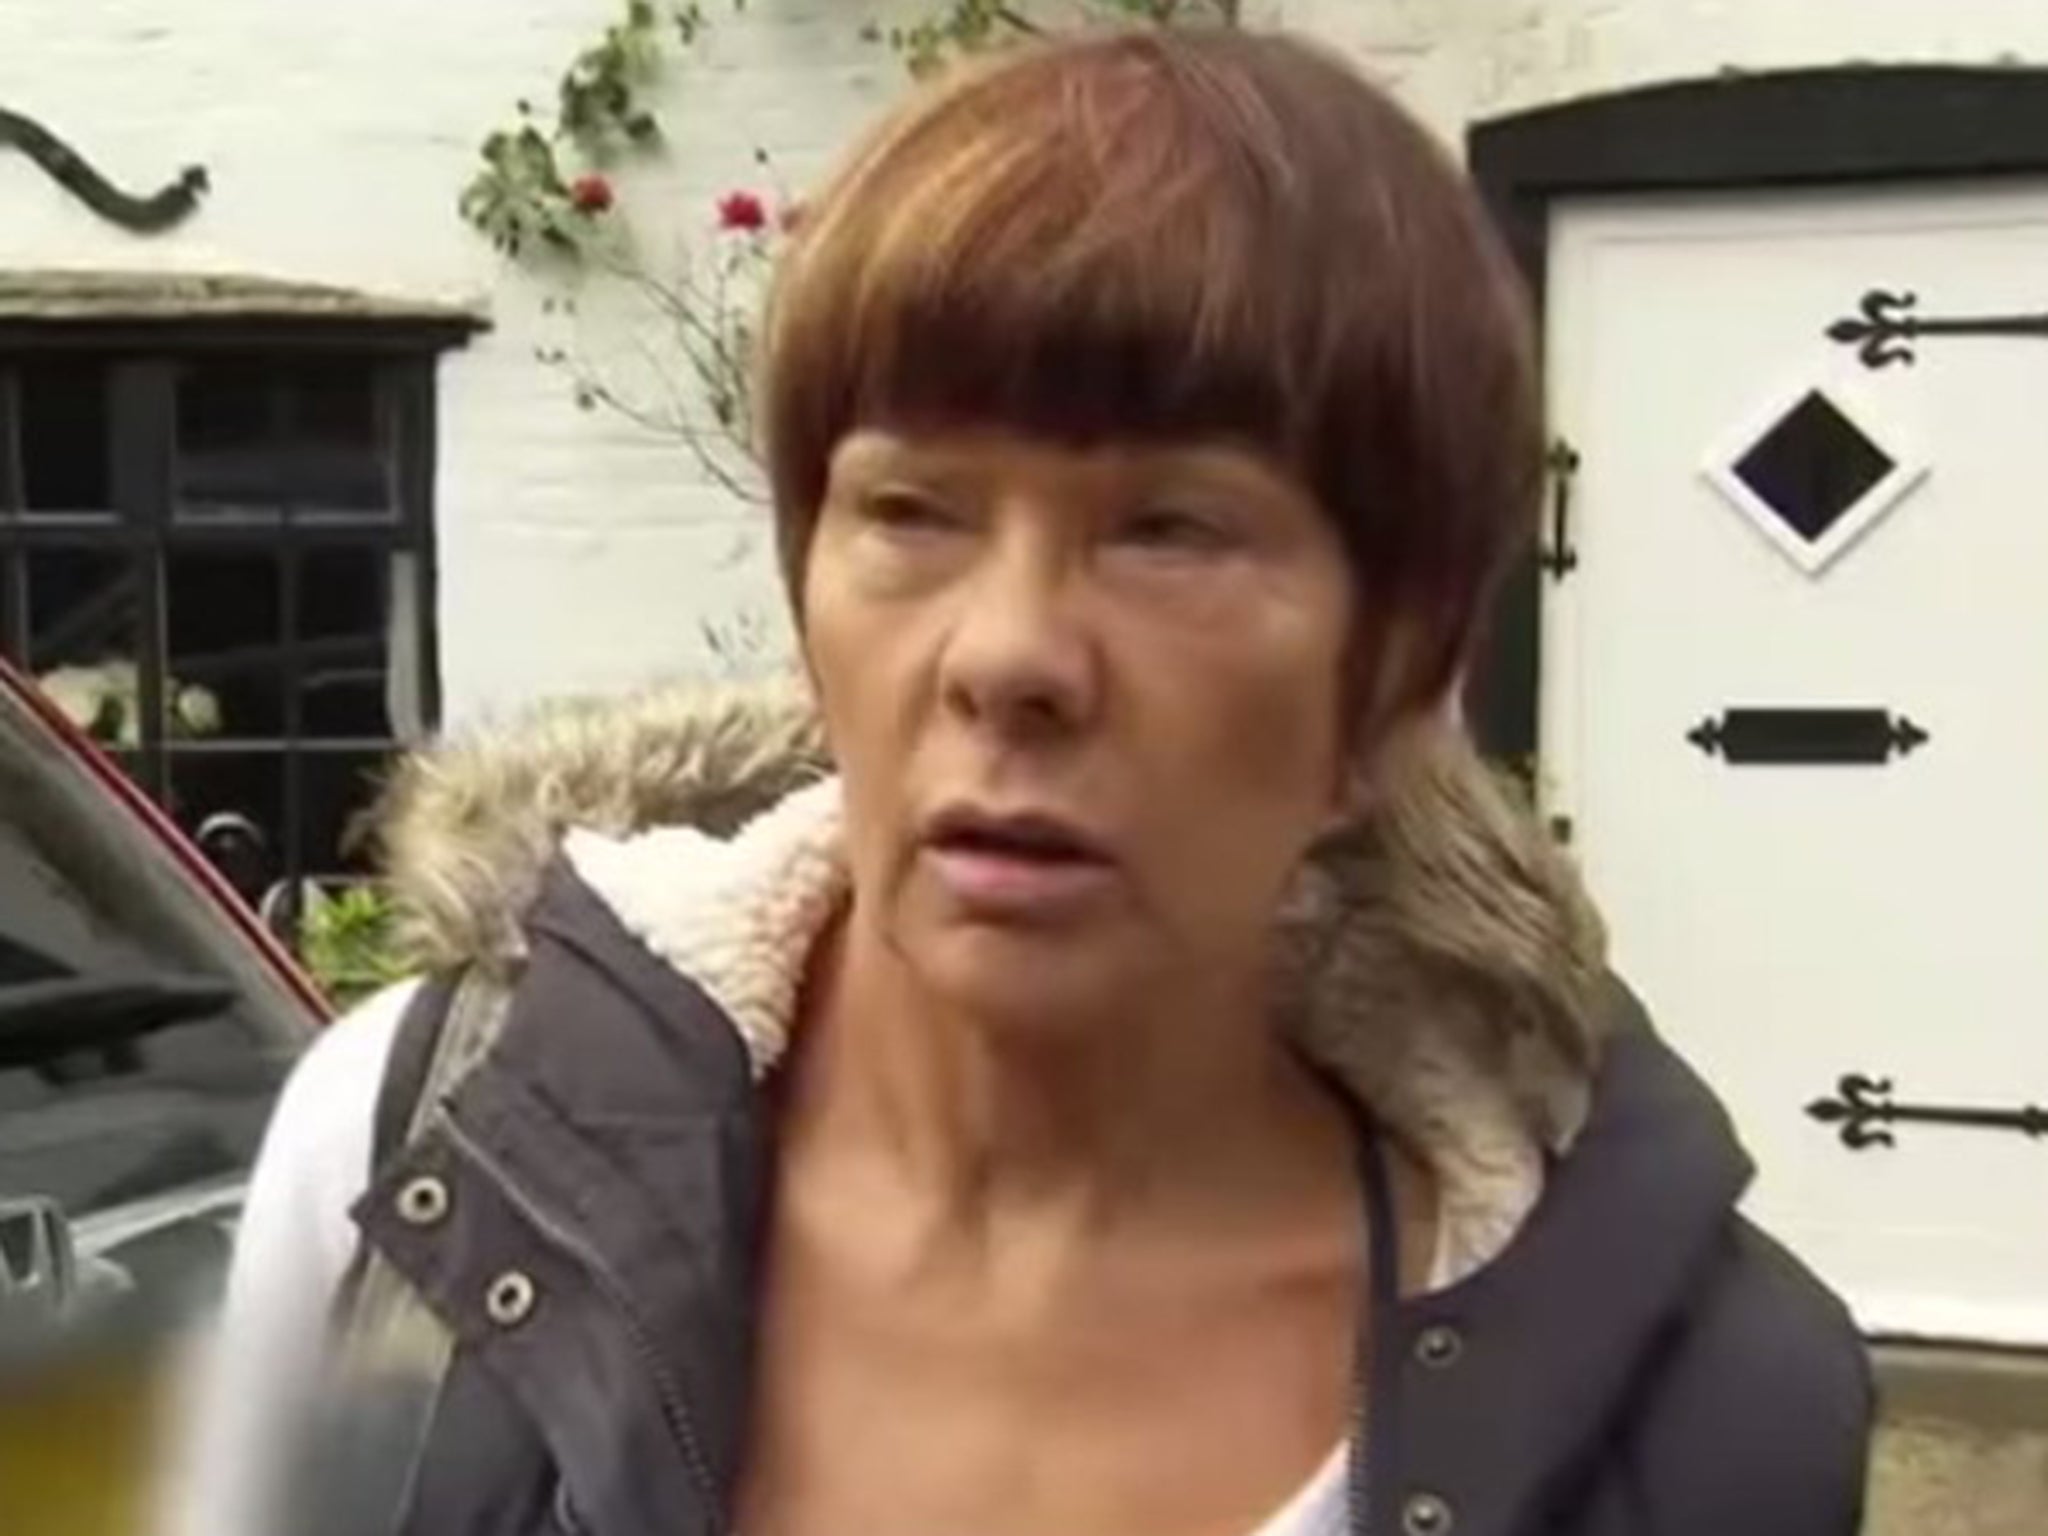 Brenda Leyland was approached by Sky News at her home in Leicestershire